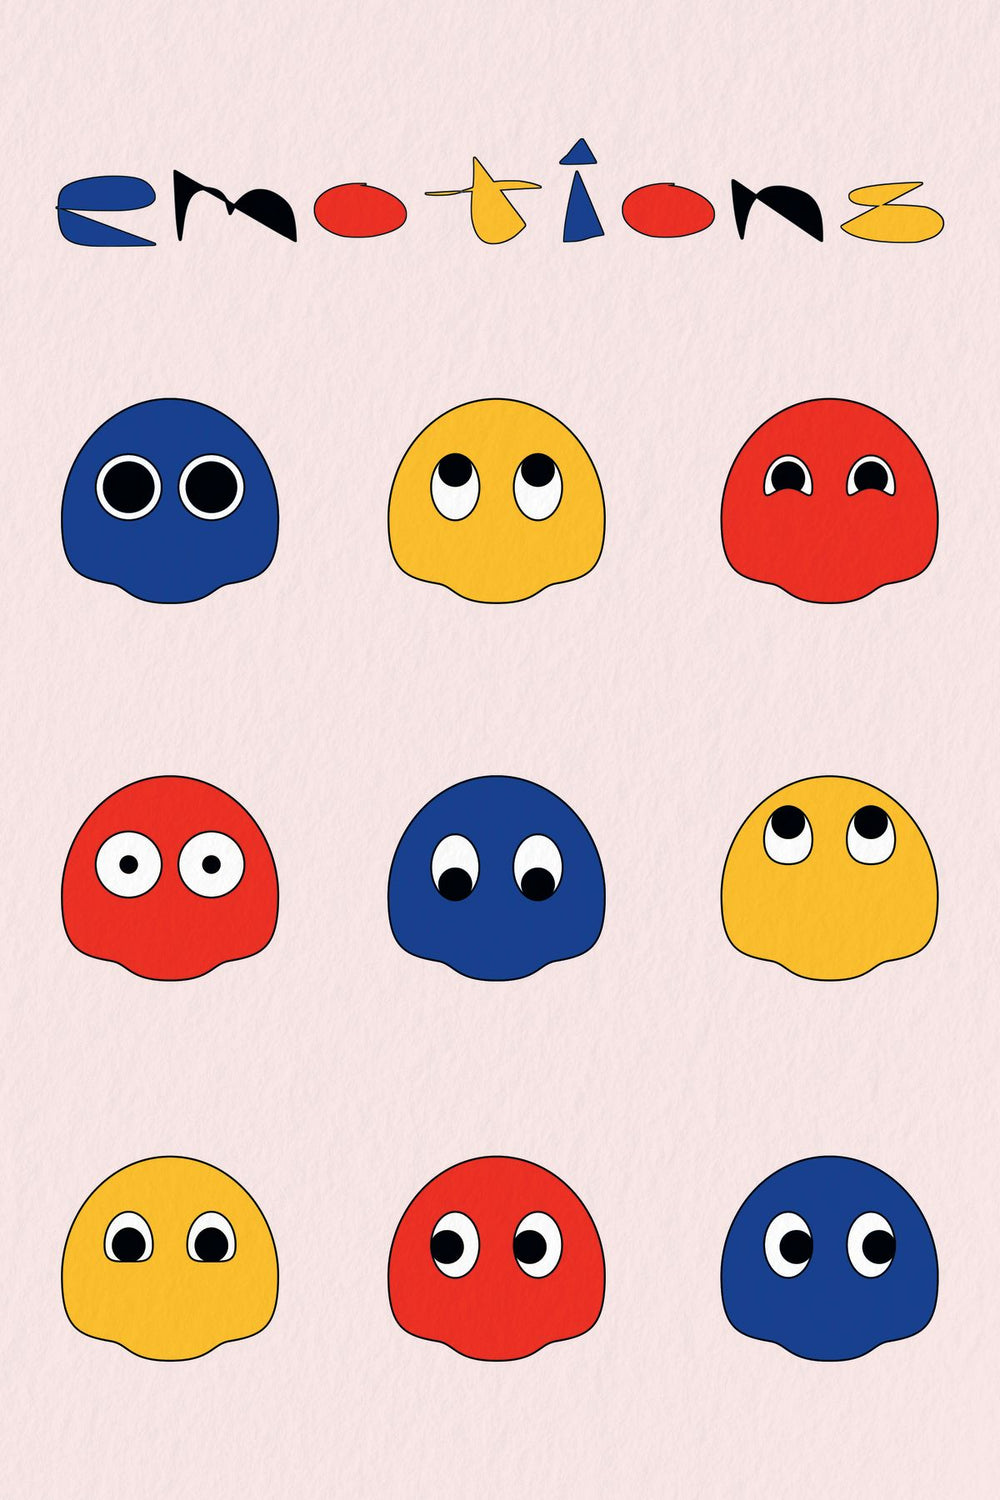 Pacman Ghosts